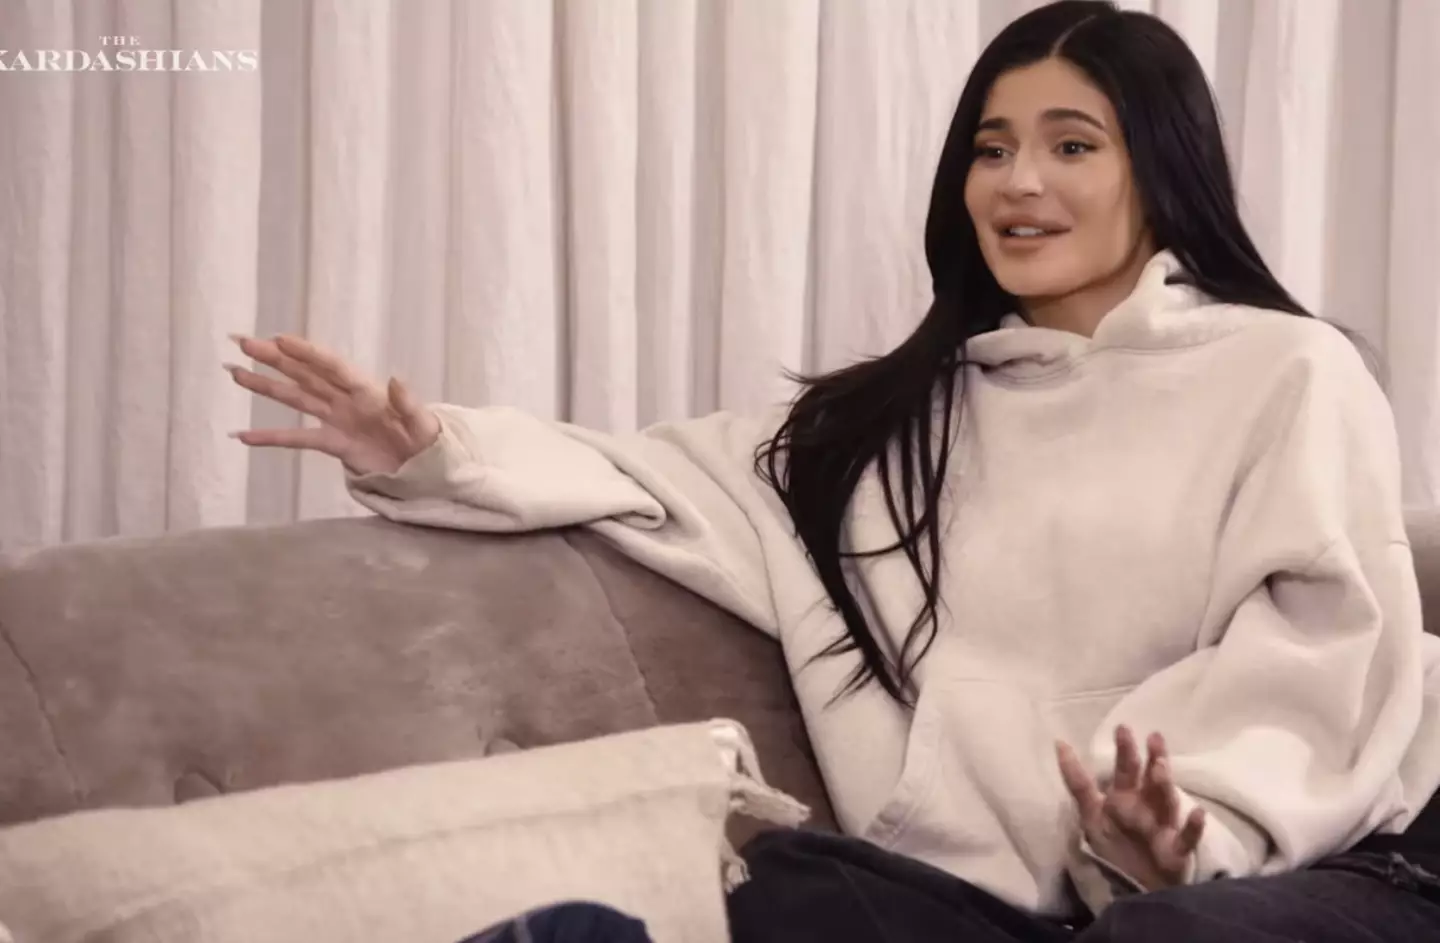 Kylie Jenner doesn't want her daughter to follow in her footsteps when it comes to cosmetic surgery.